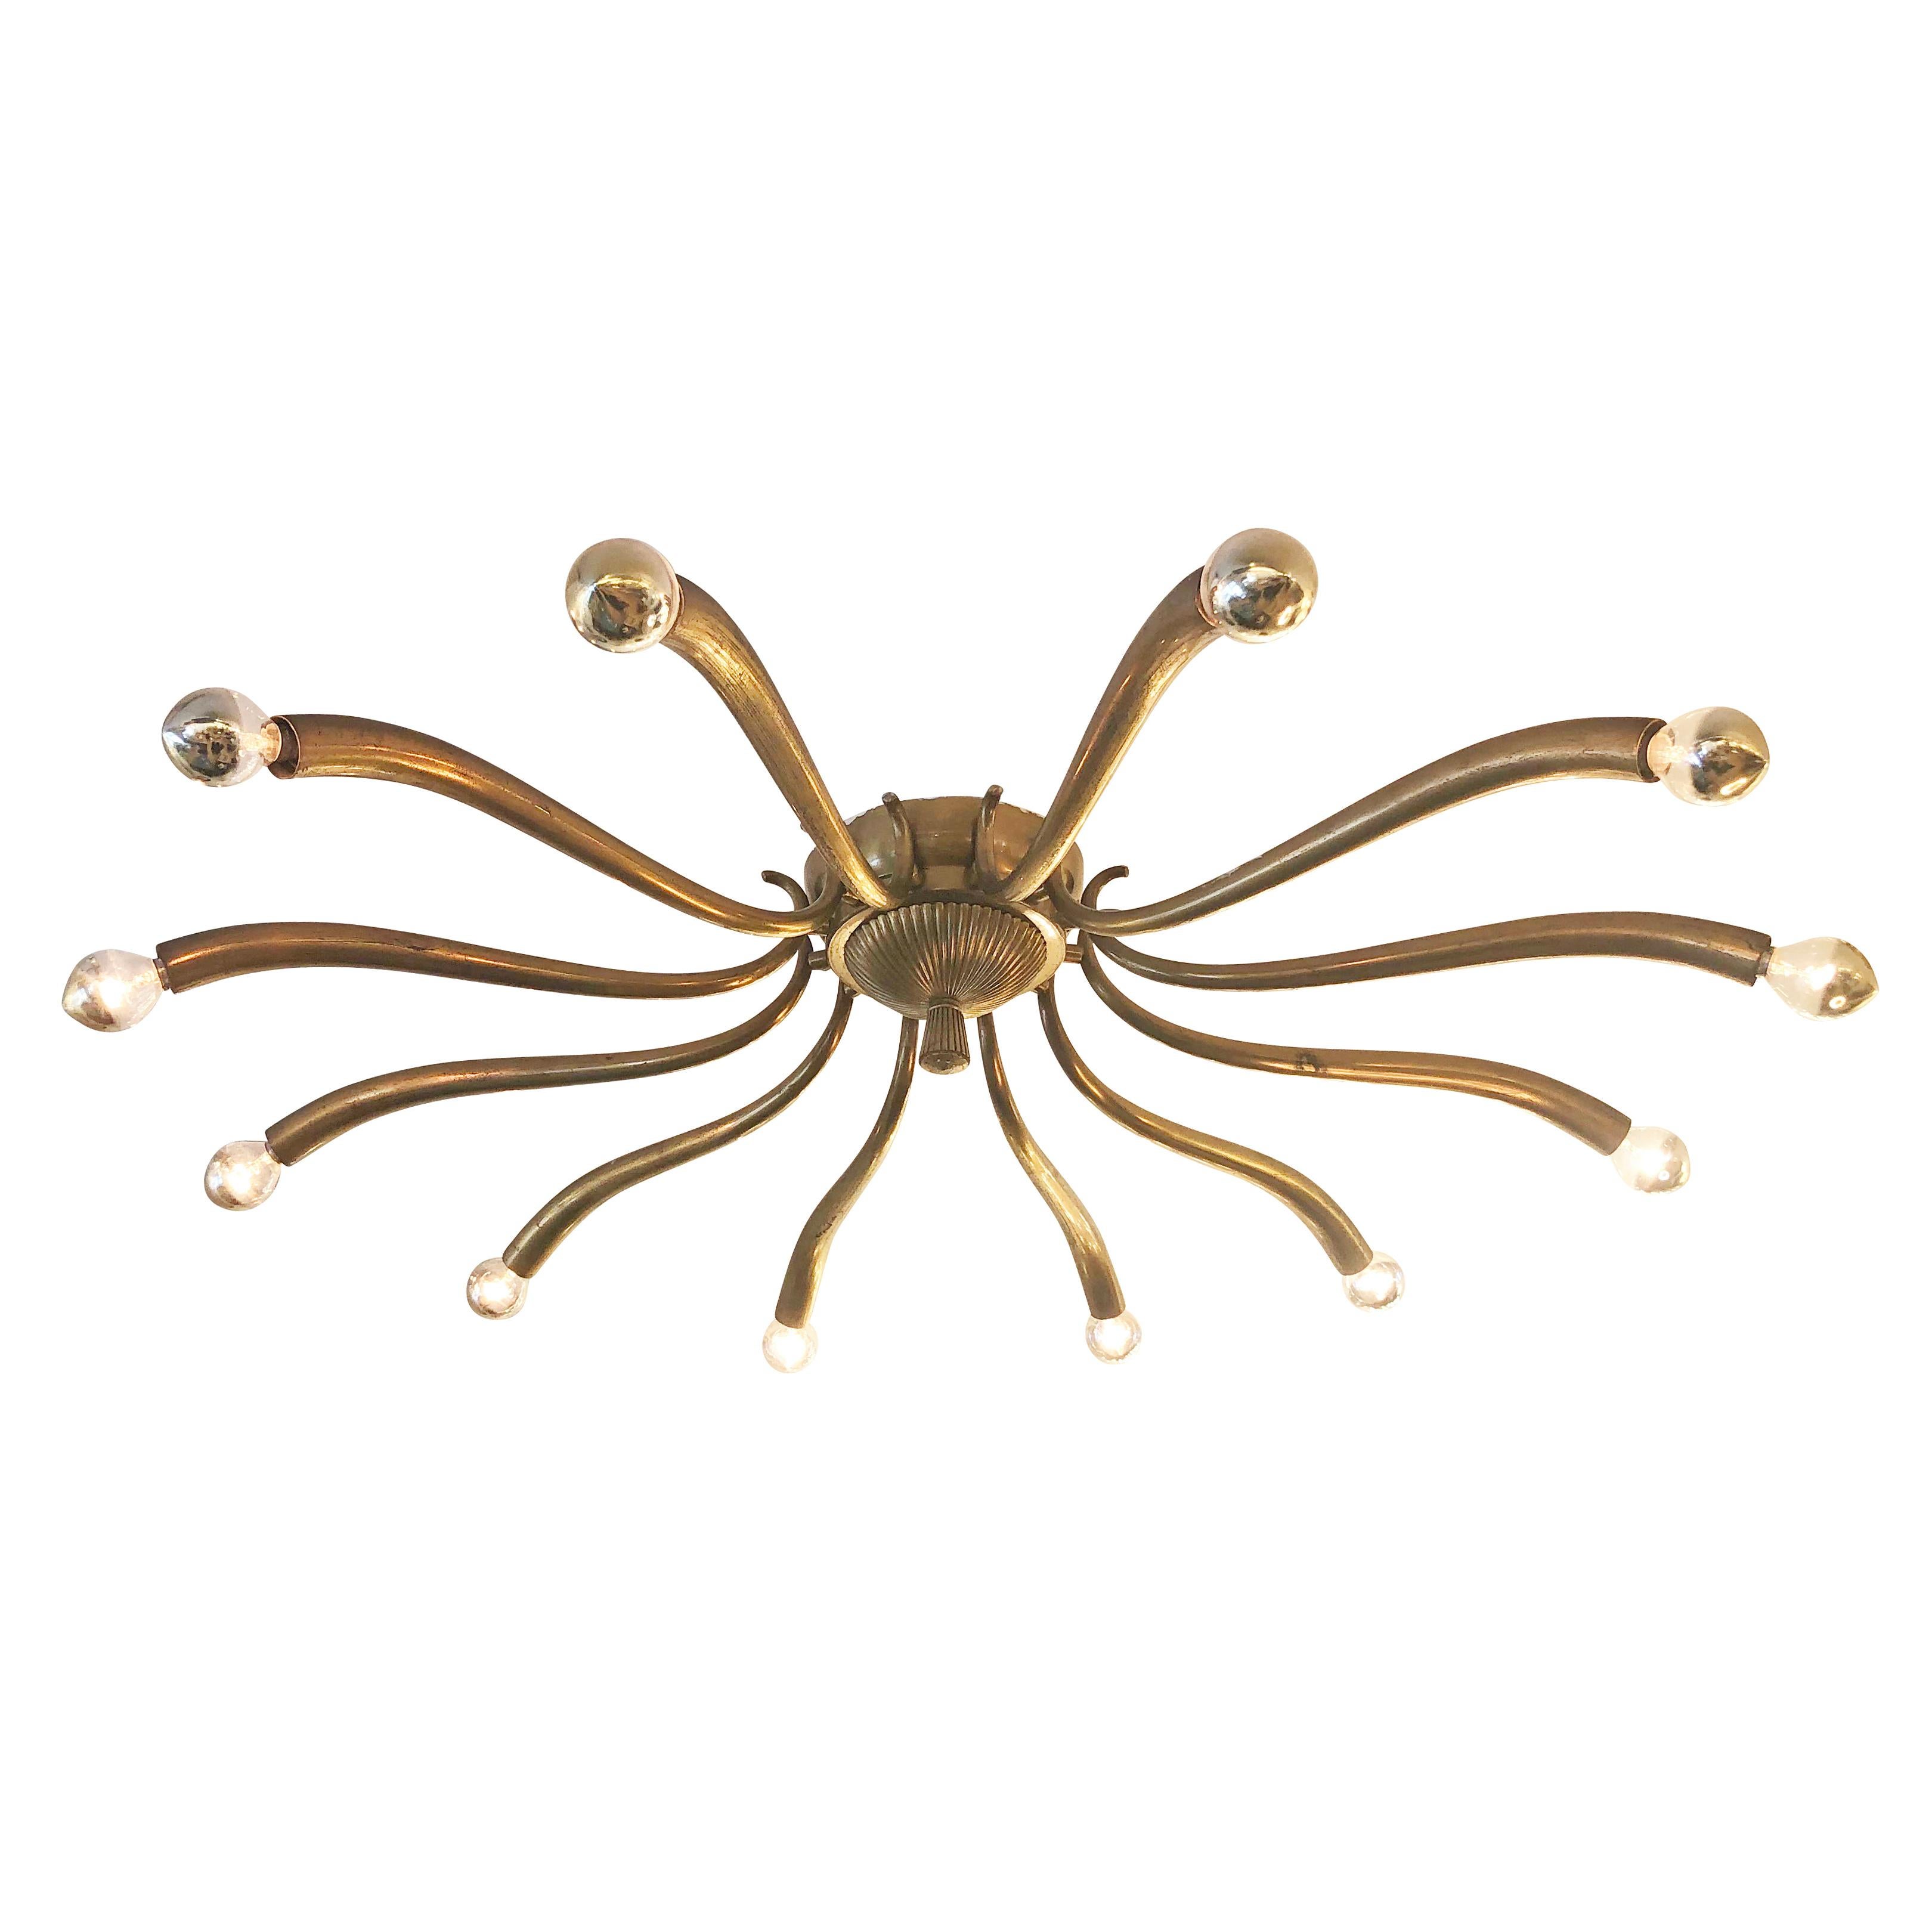 Large 1940s chandelier attributed to Guglielmo Ulrich with twelve sloping brass arms. Holds twelve candelabra sockets. Can be installed as a flush mount or on a stem.

Condition: Excellent vintage condition, minor wear consistent with age and use